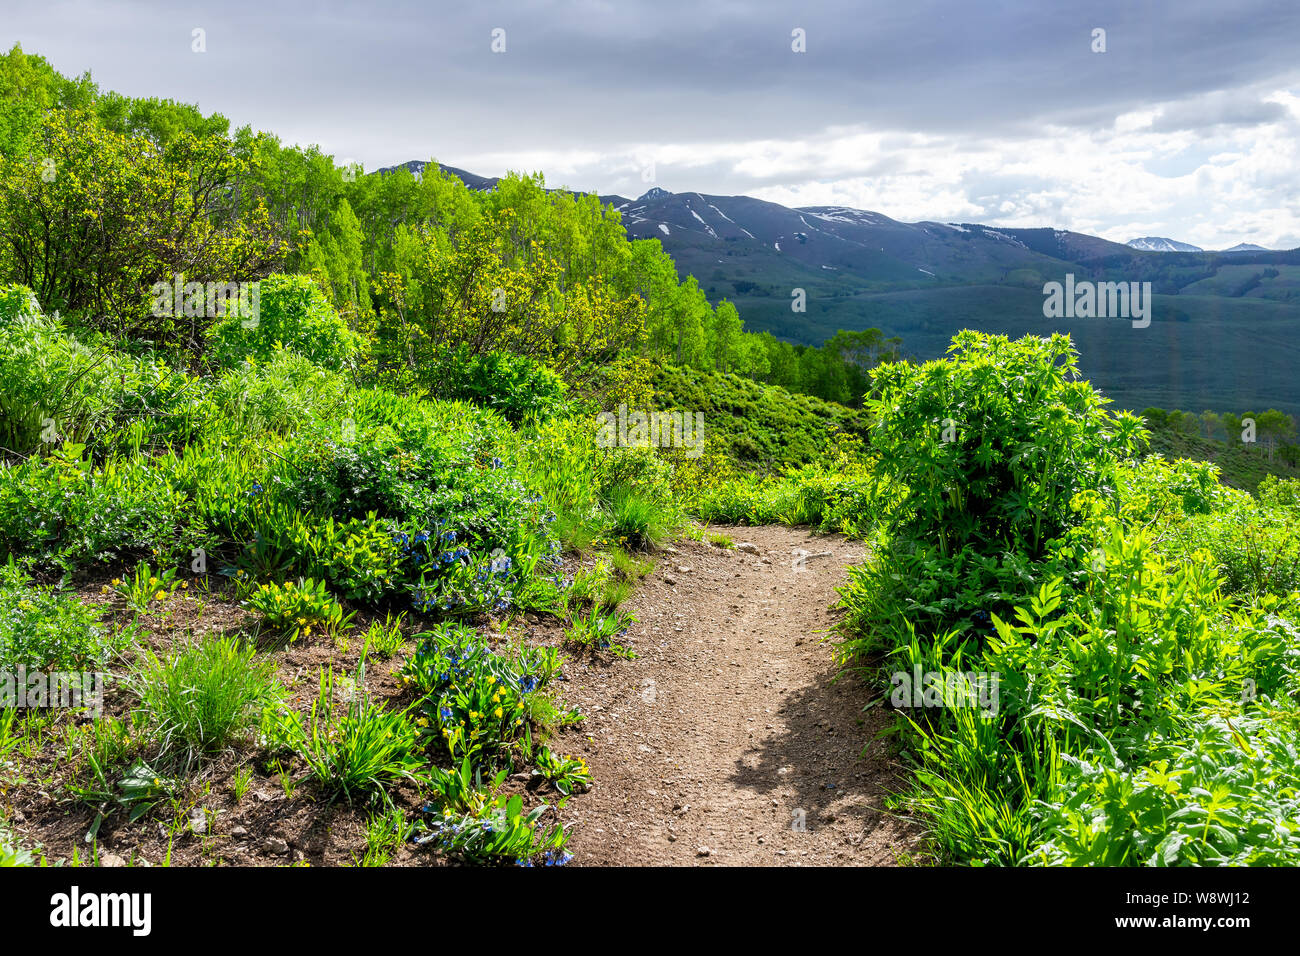 Bluebell flowers on Crested Butte, Colorado countryside with Snodgrass hiking trail in summer Stock Photo